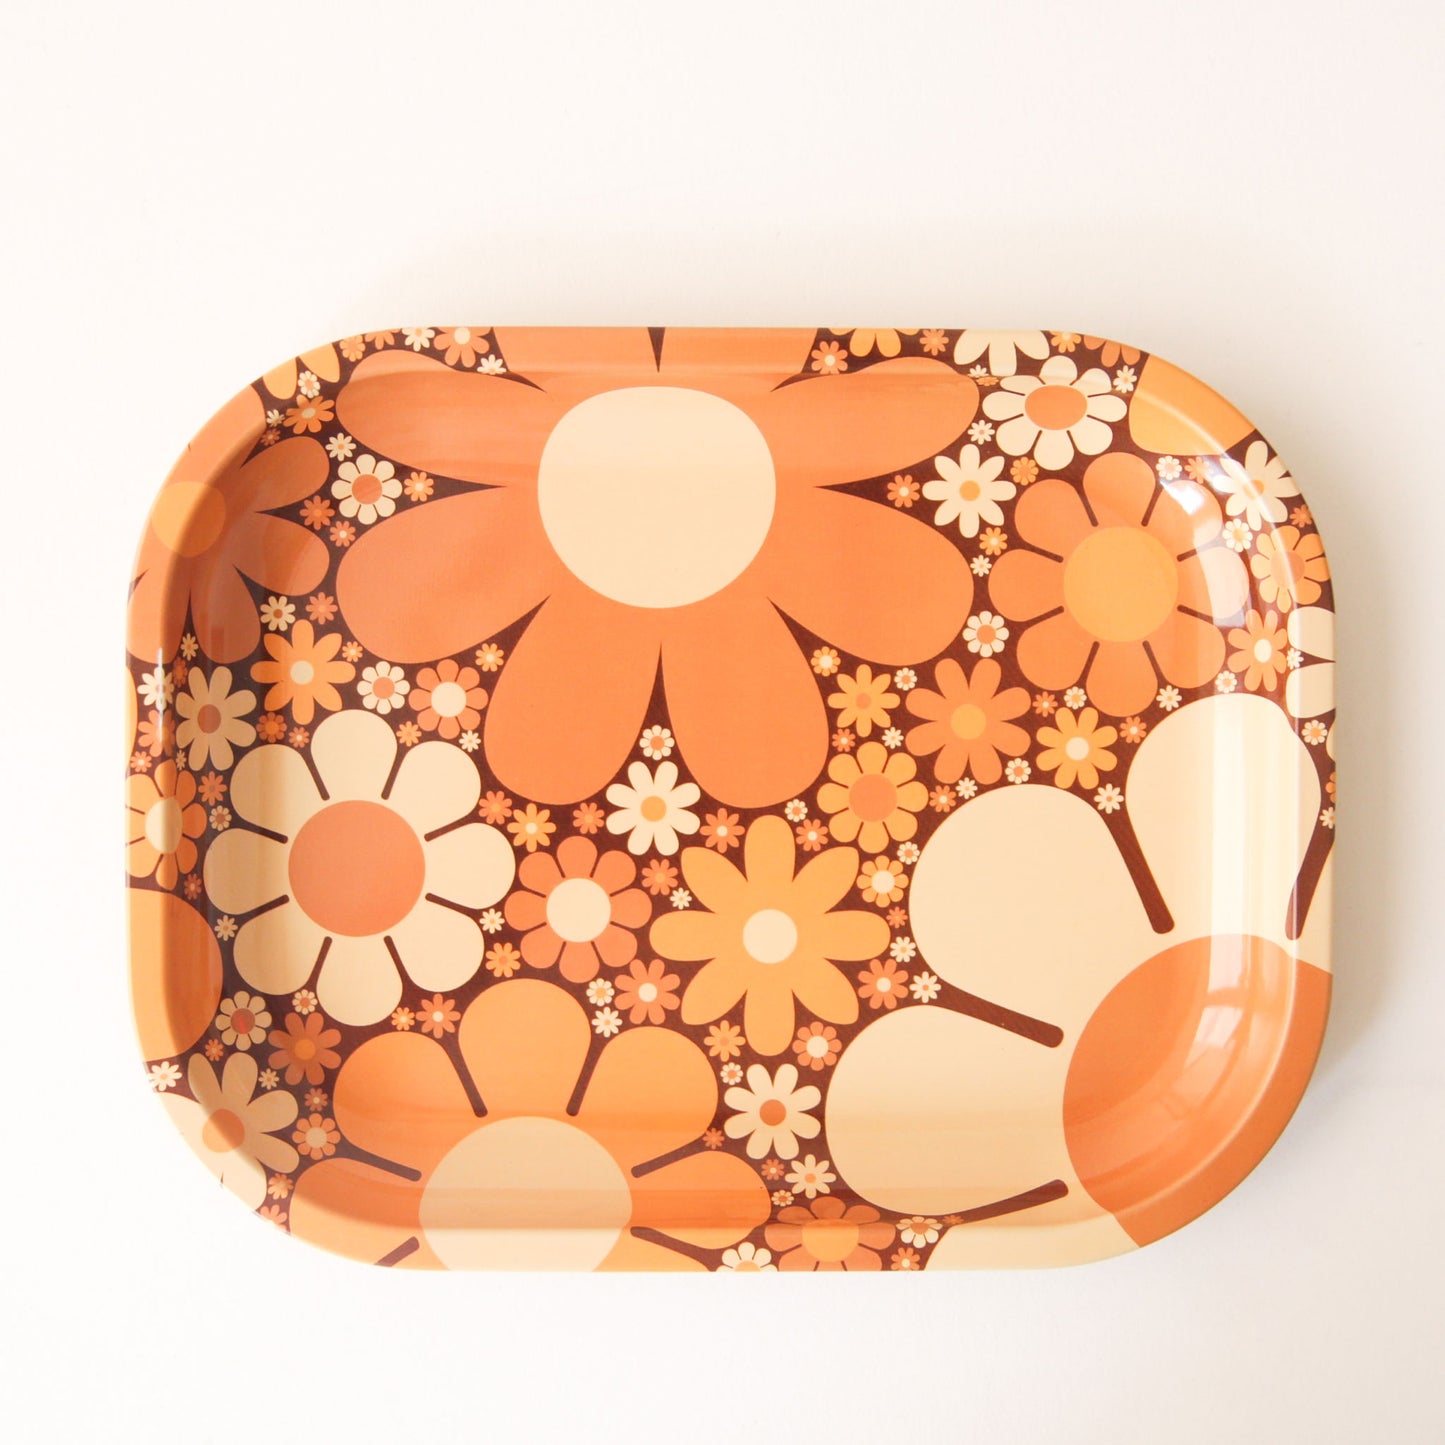 A metal tray perfect for rolling or all your favorite trinkets. It features a 70's inspired floral design with a variation of daisies in different shapes, sizes and colors.